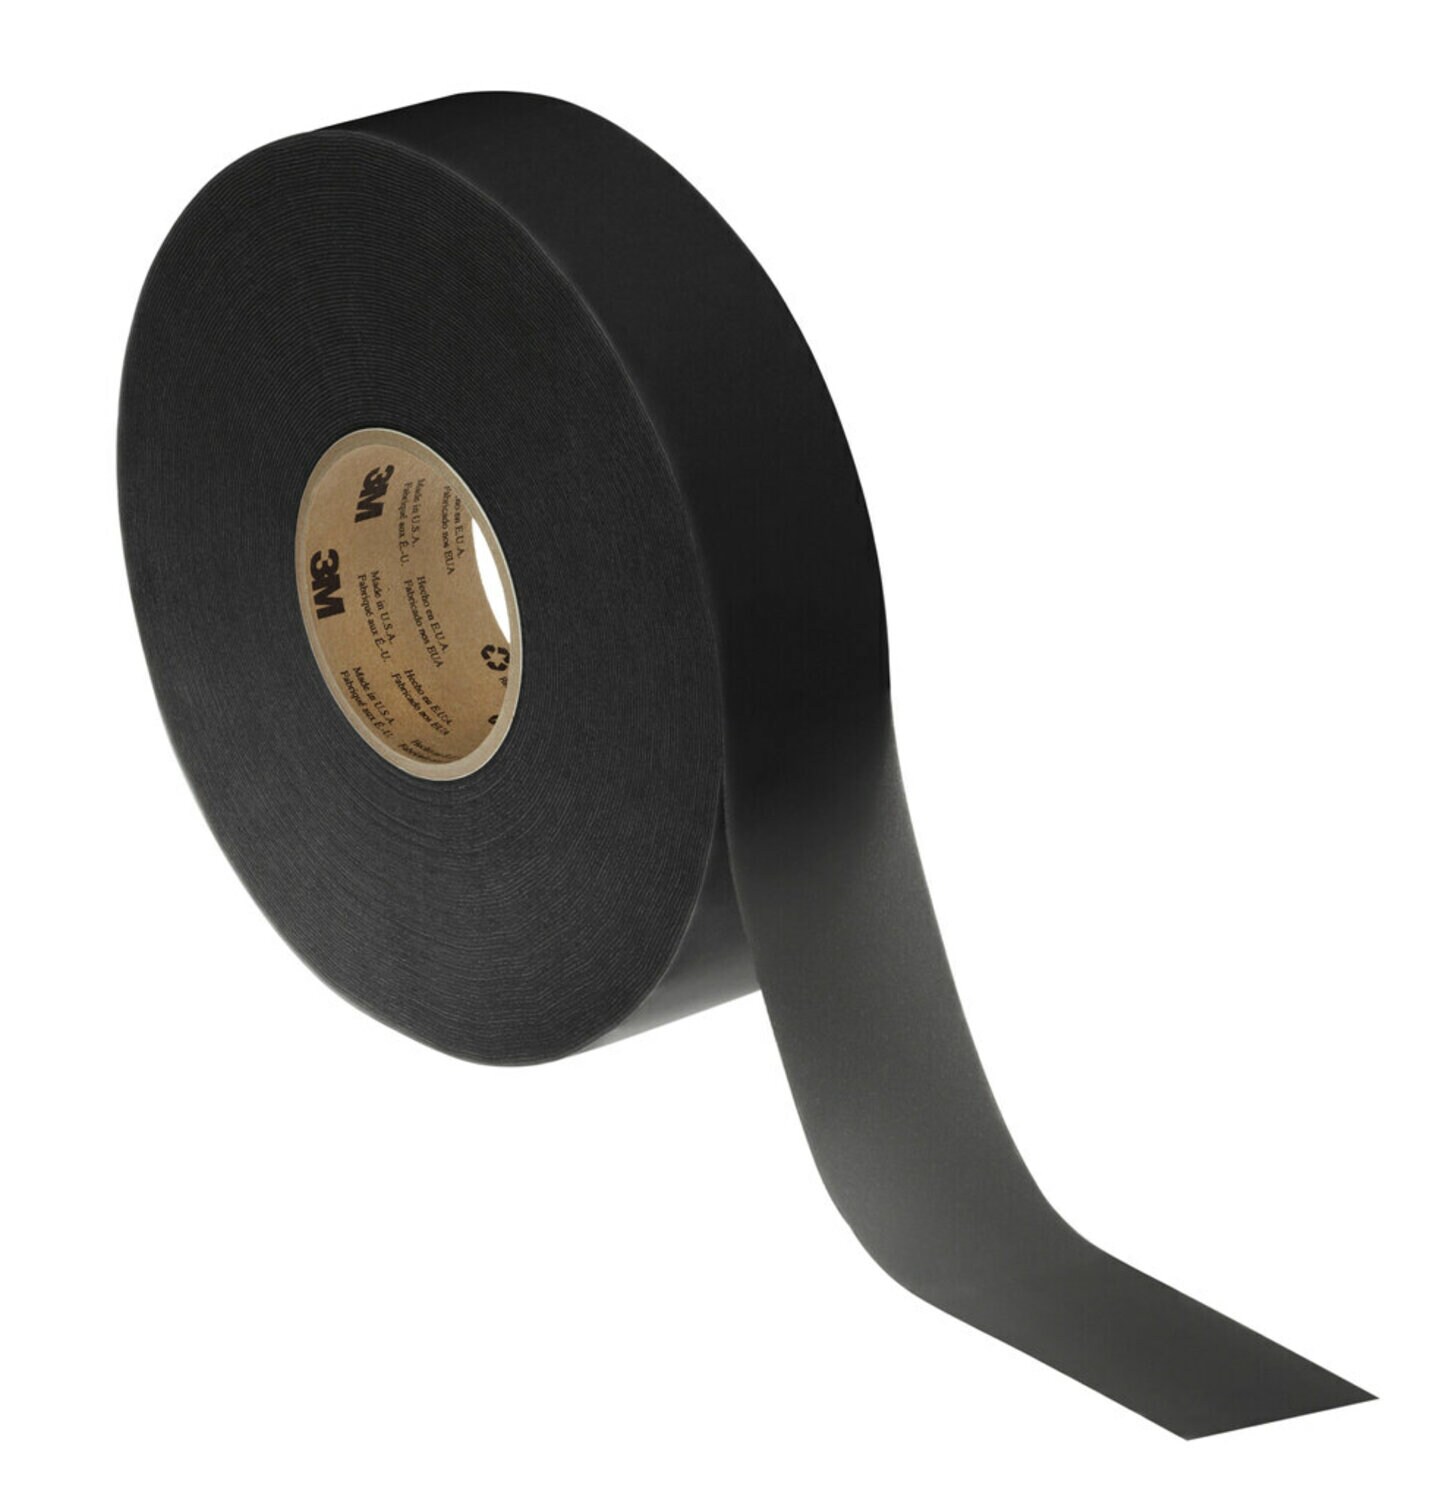 7100020095 - 3M Extreme Sealing Tape 4411B, Black, 24 in x 36 yd, 40 mil, 1 roll per
case